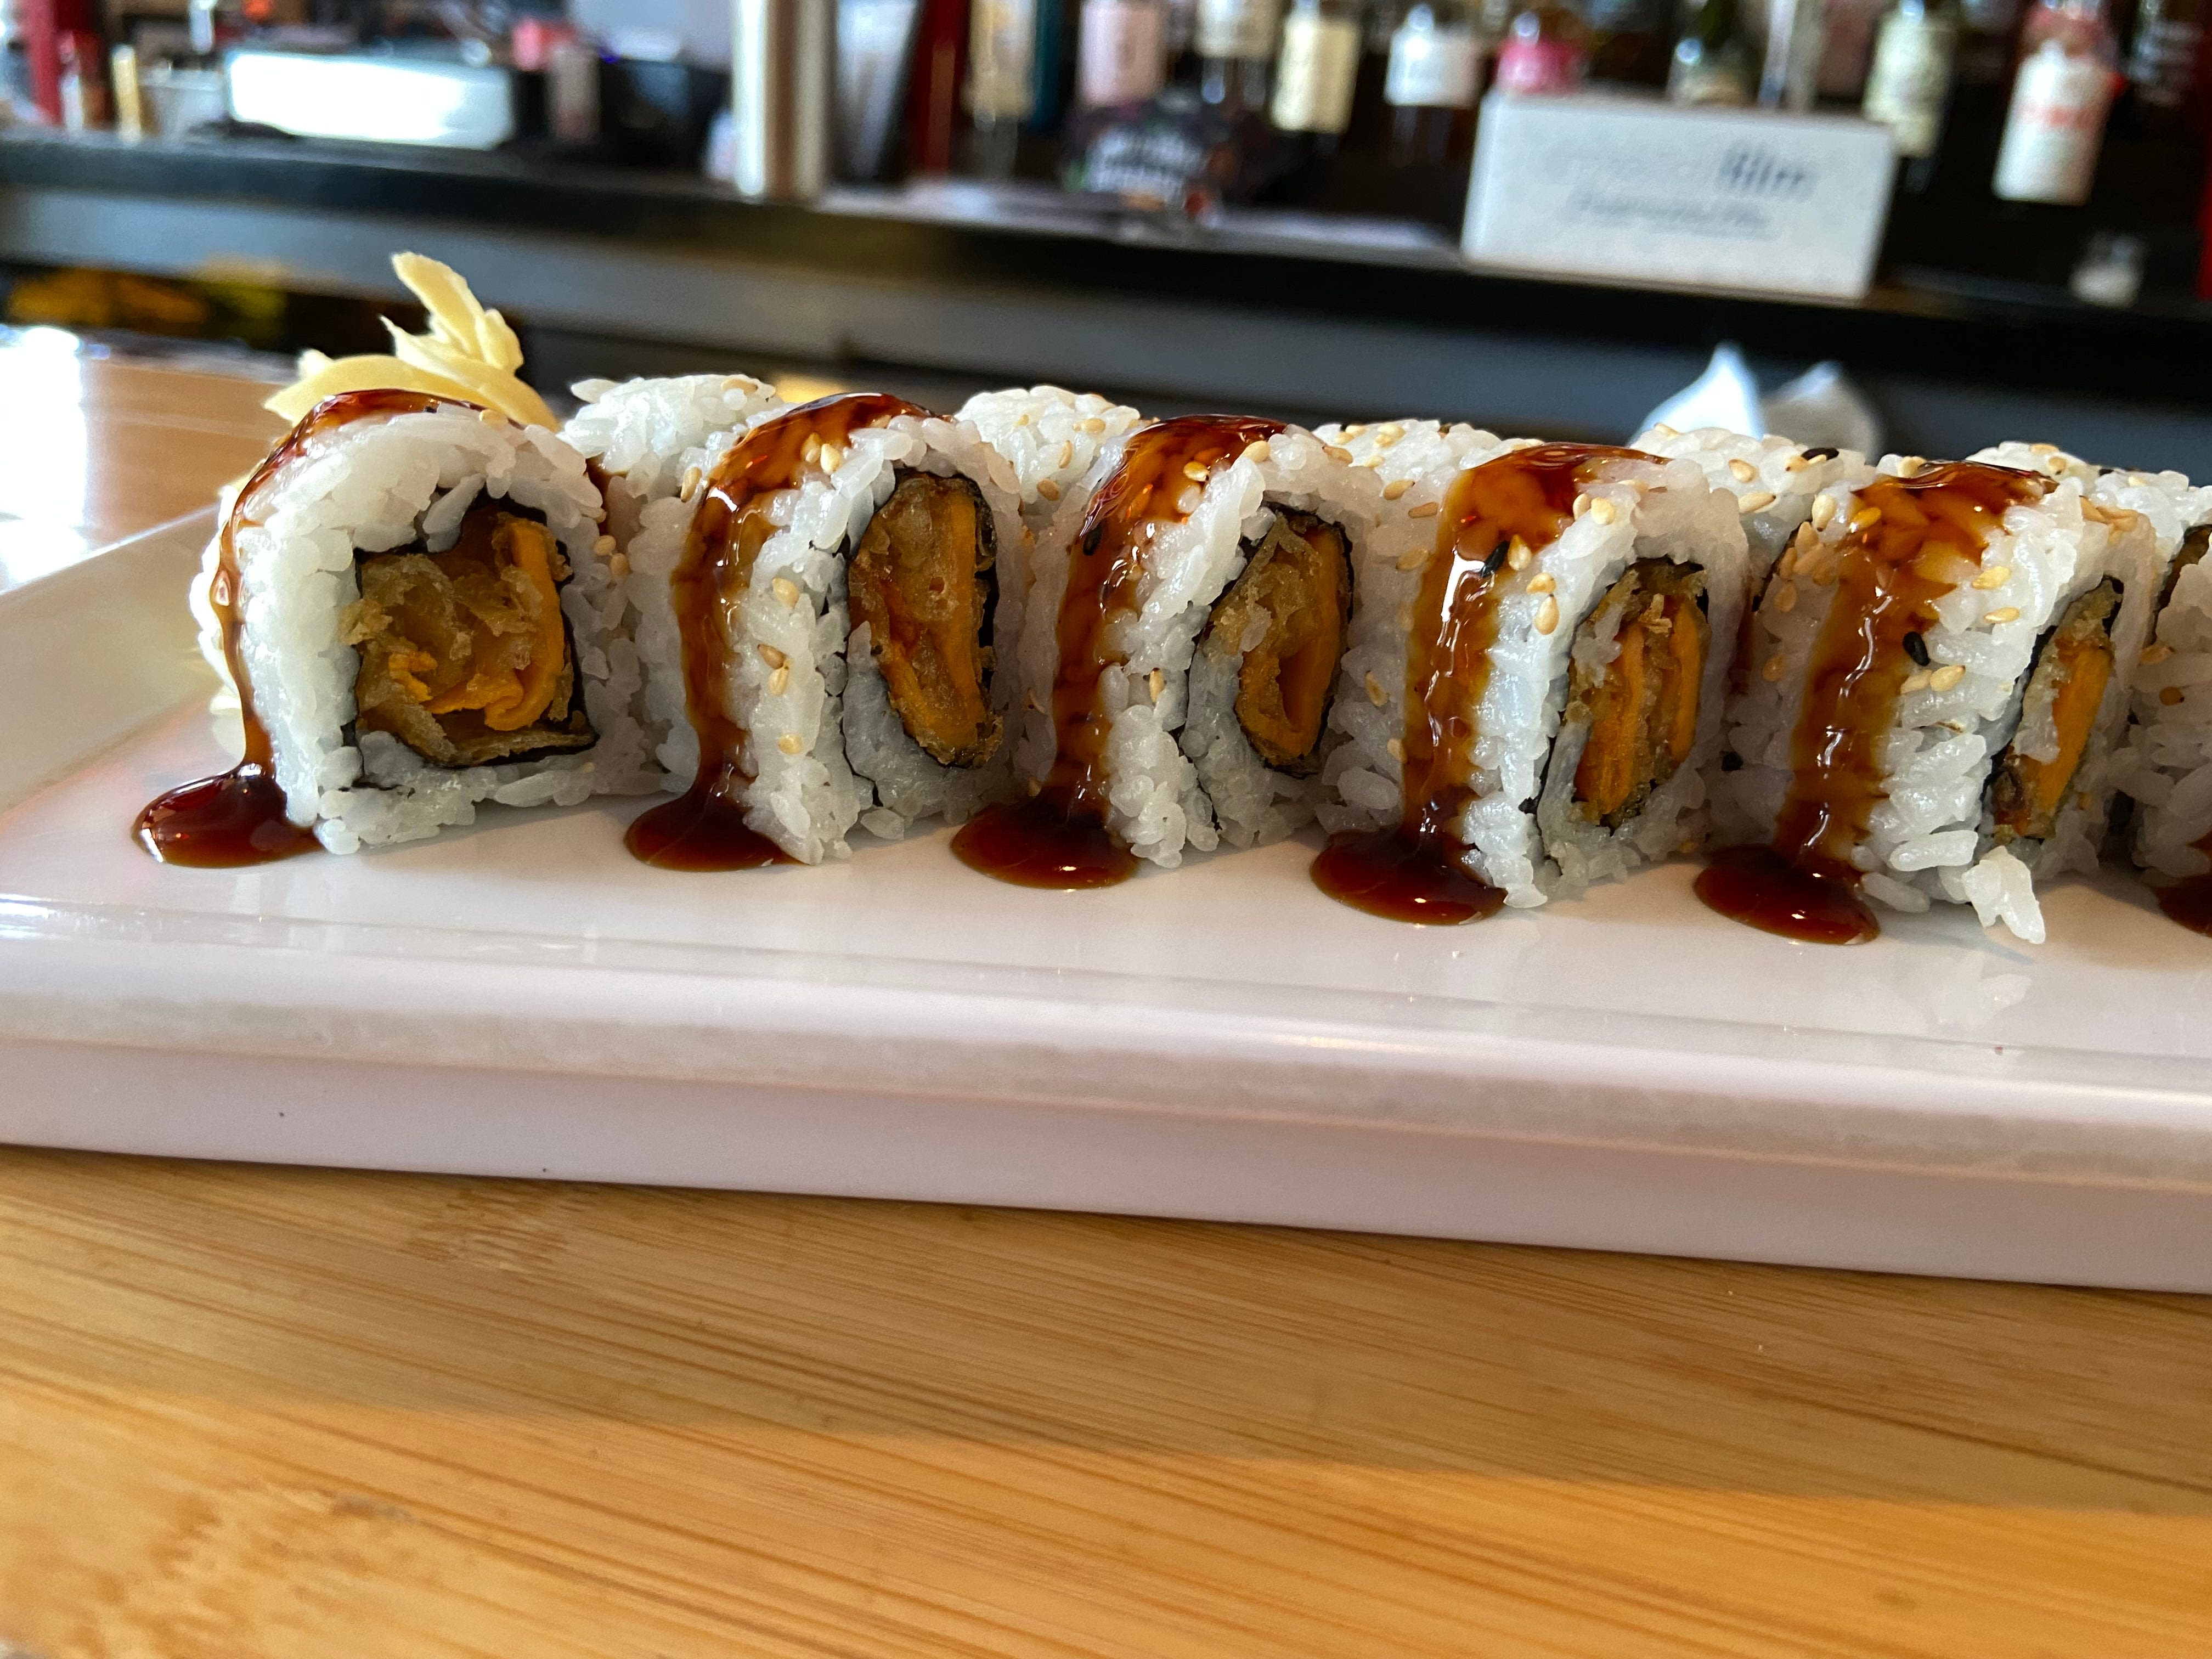 Fresh plates, popular cocktails: This sushi spot helps define the cozy South Wedge